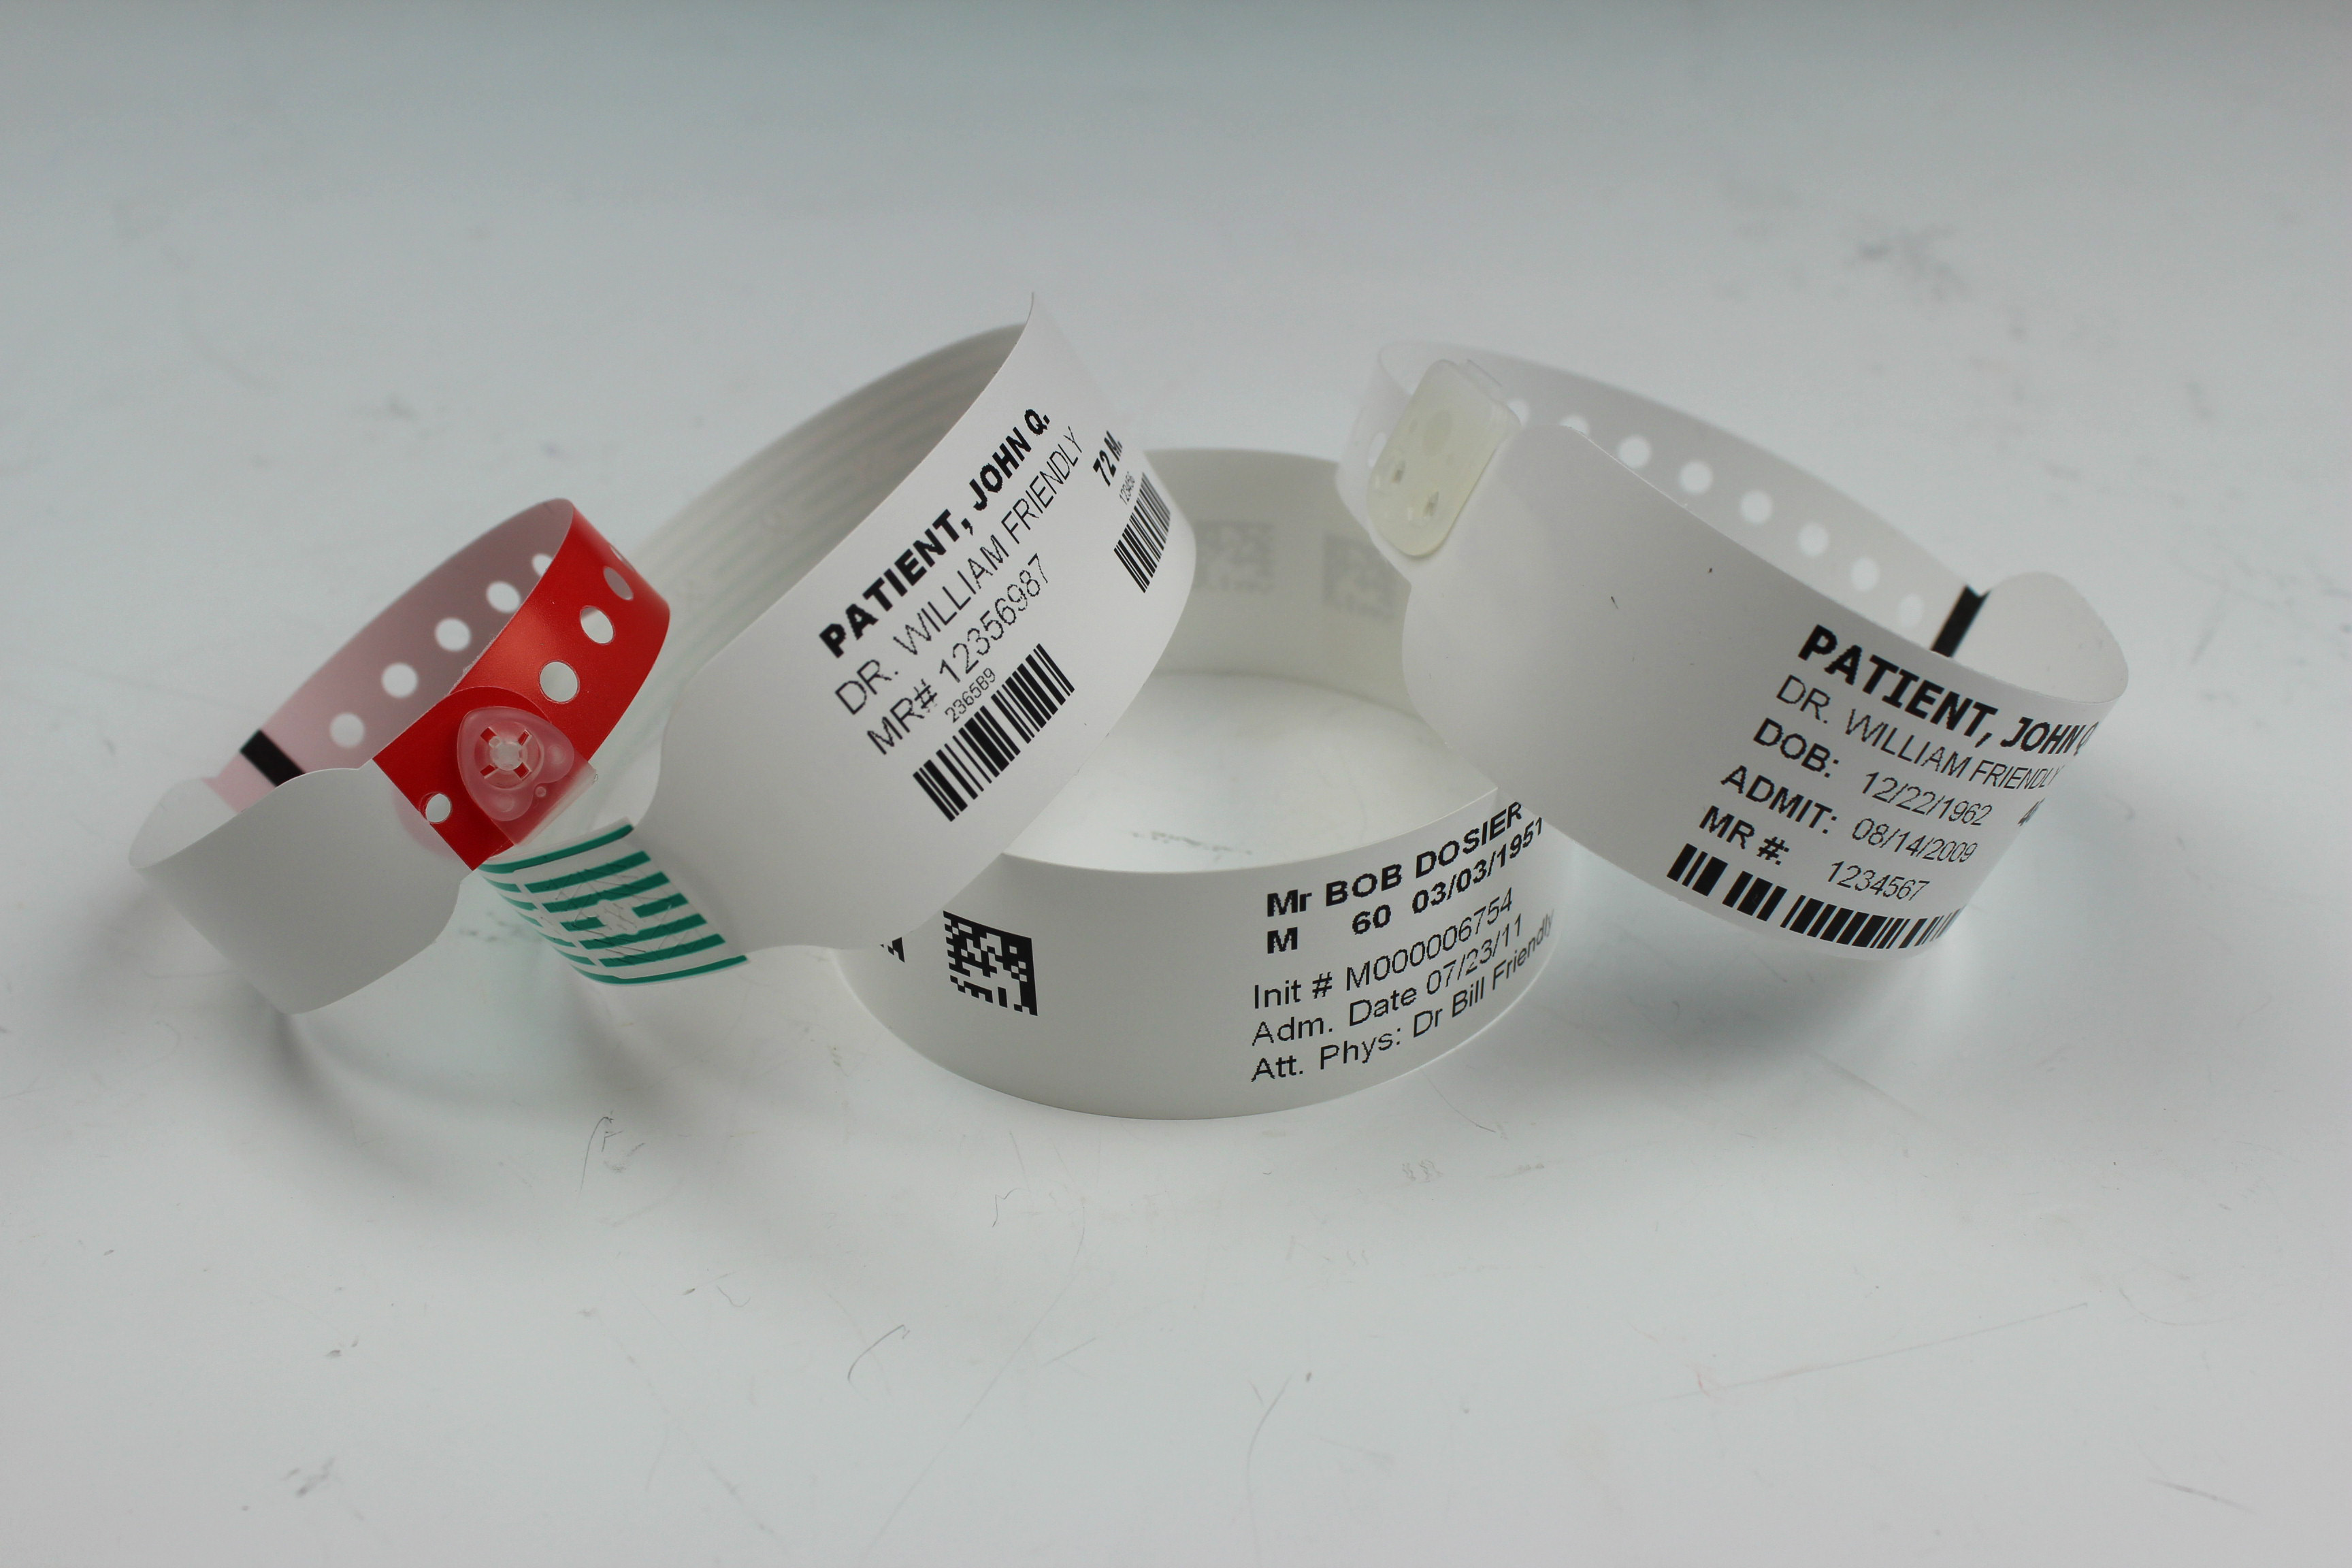 PDC Healthcare's "Comfort Collection" thermal patient ID wristbands